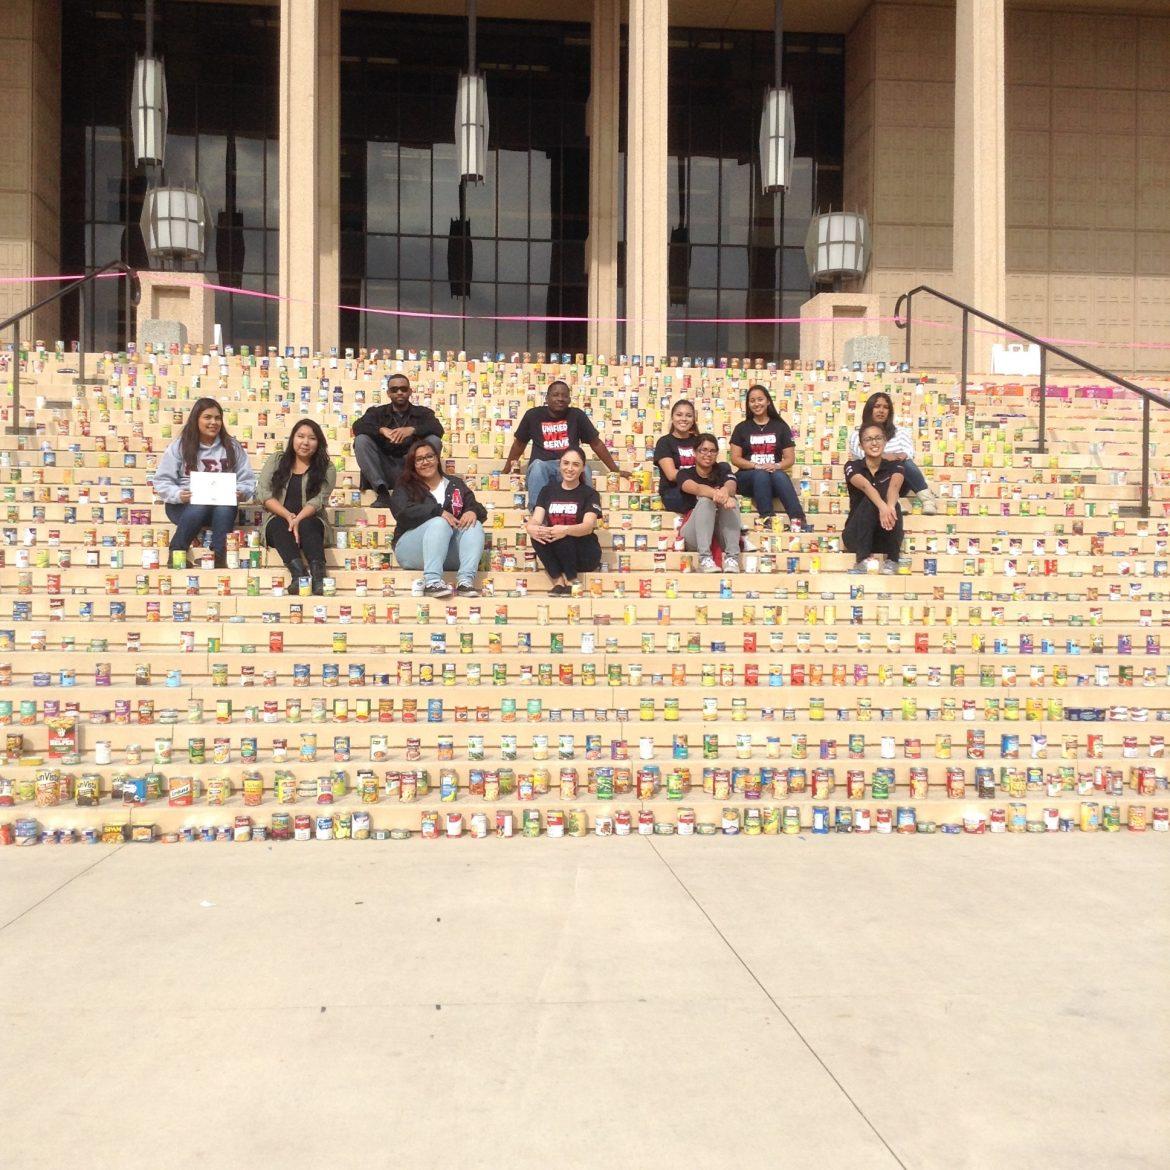 Students from the Unified We Serve student volunteer program at California State University, Northridge, are shown with donations in front of the Oviatt Library on Thursday, Nov. 13, 2014.